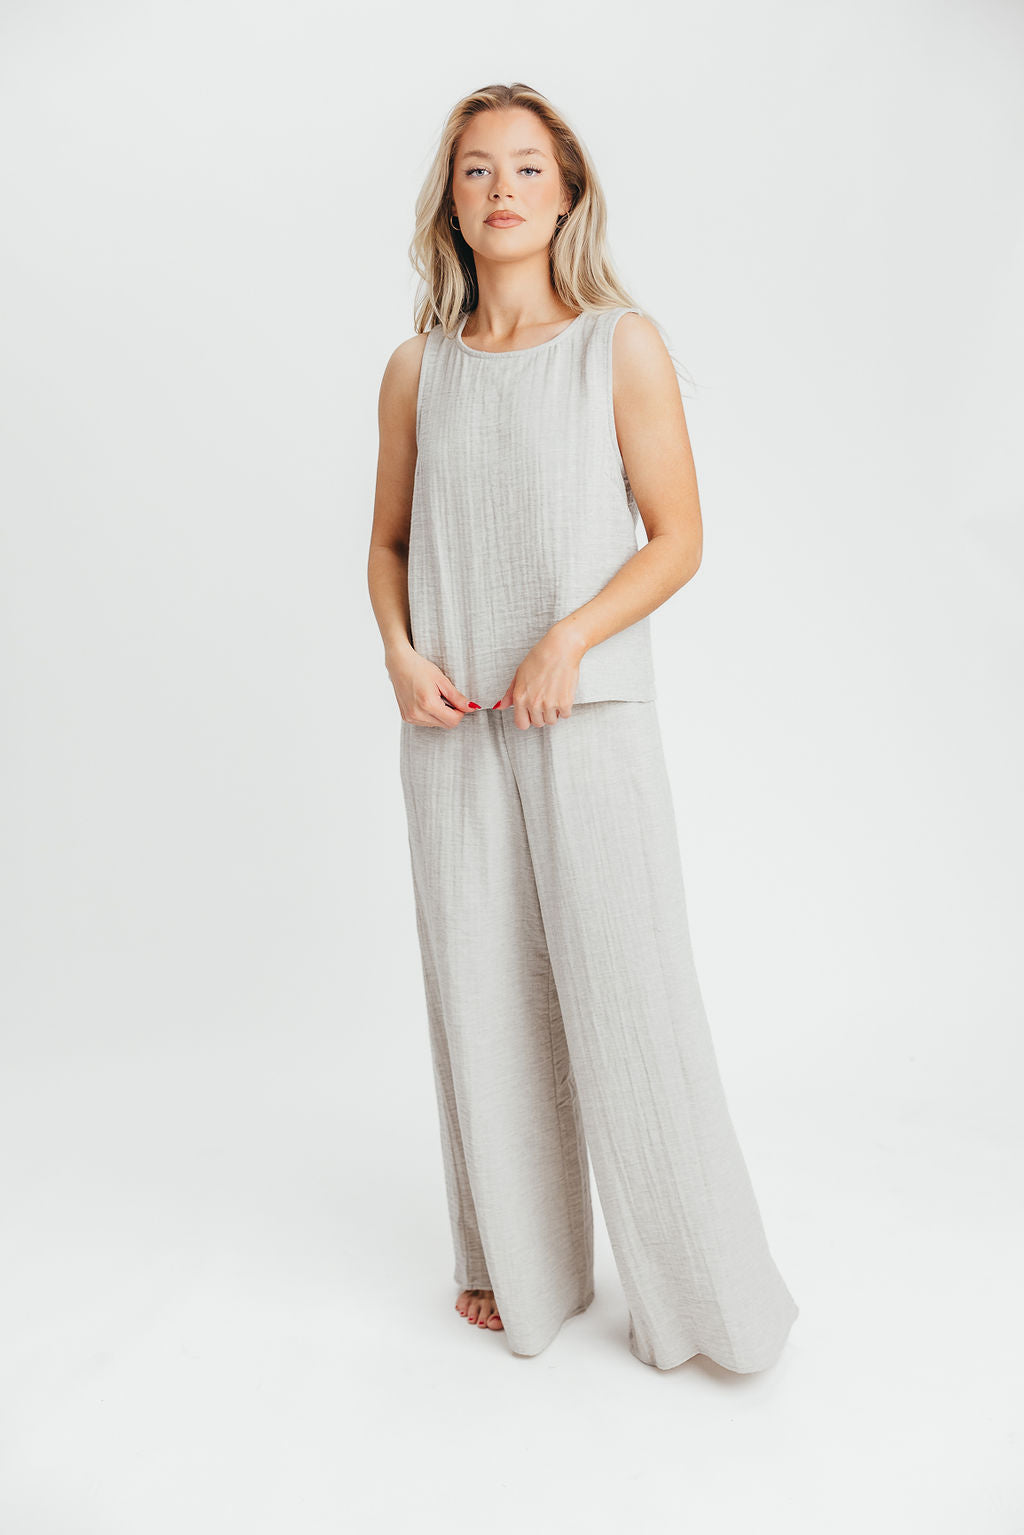 Love Lock Sleeveless Top and Pant Set in Linen Grey - 100% Cotton